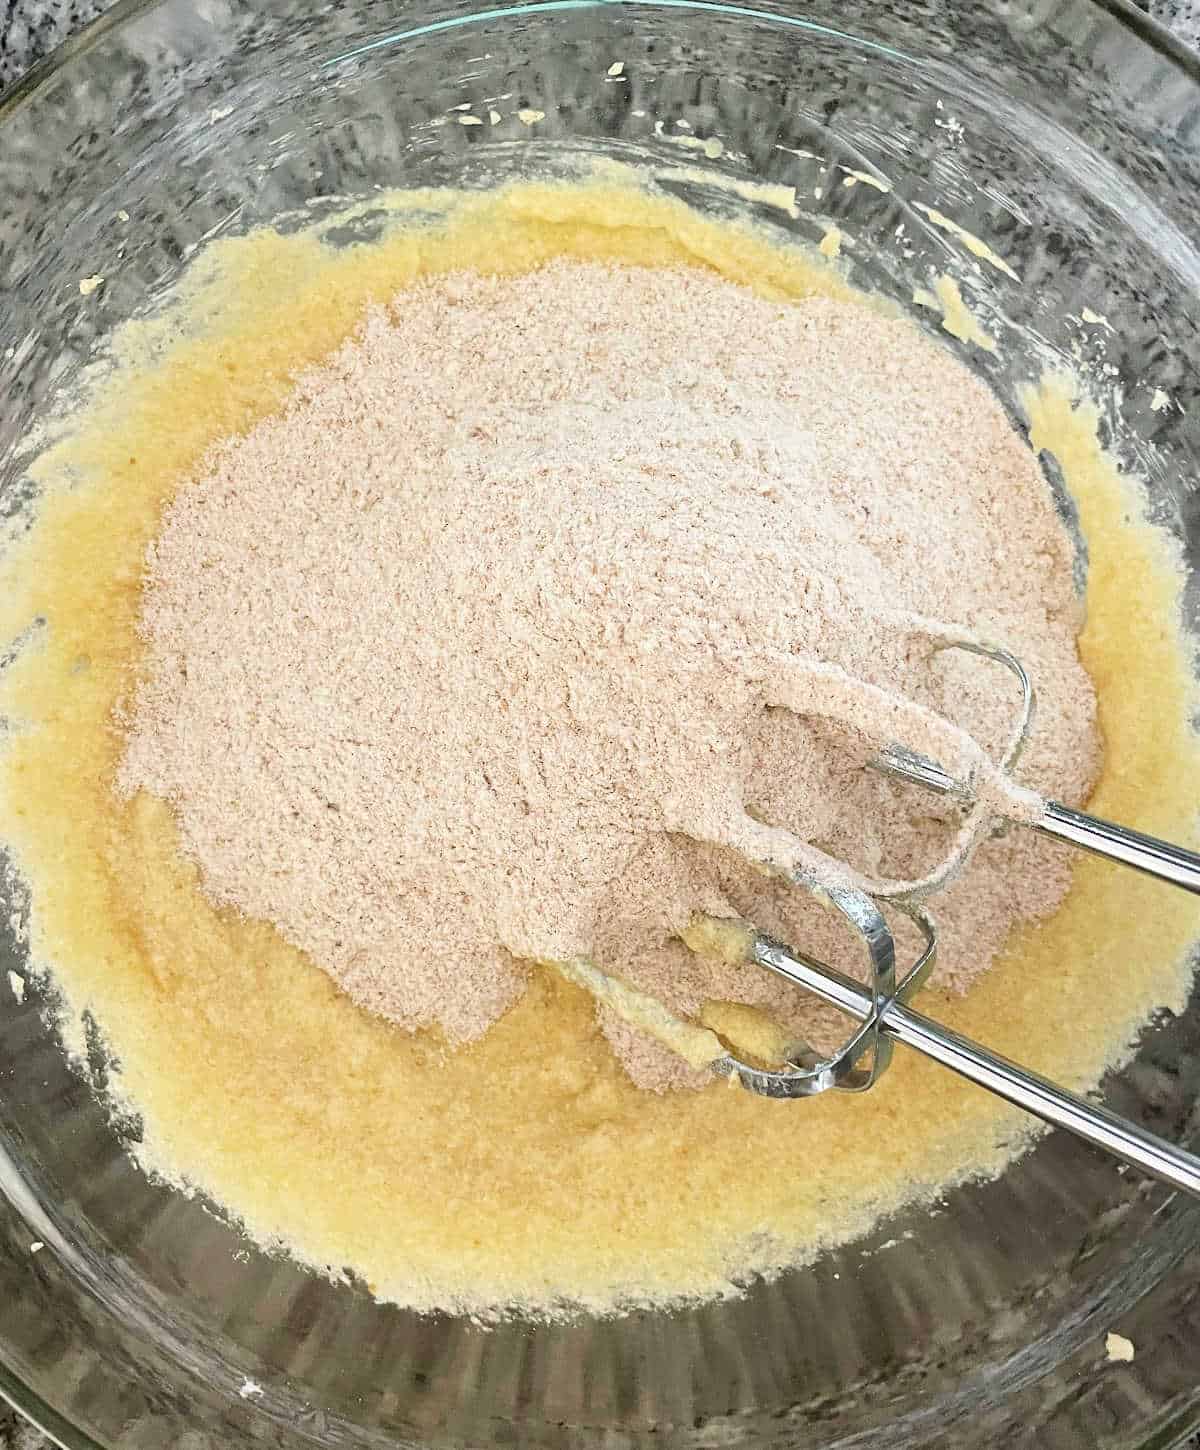 Whole wheat flour added to applesauce bread batter in a glass bowl on a grey surface.